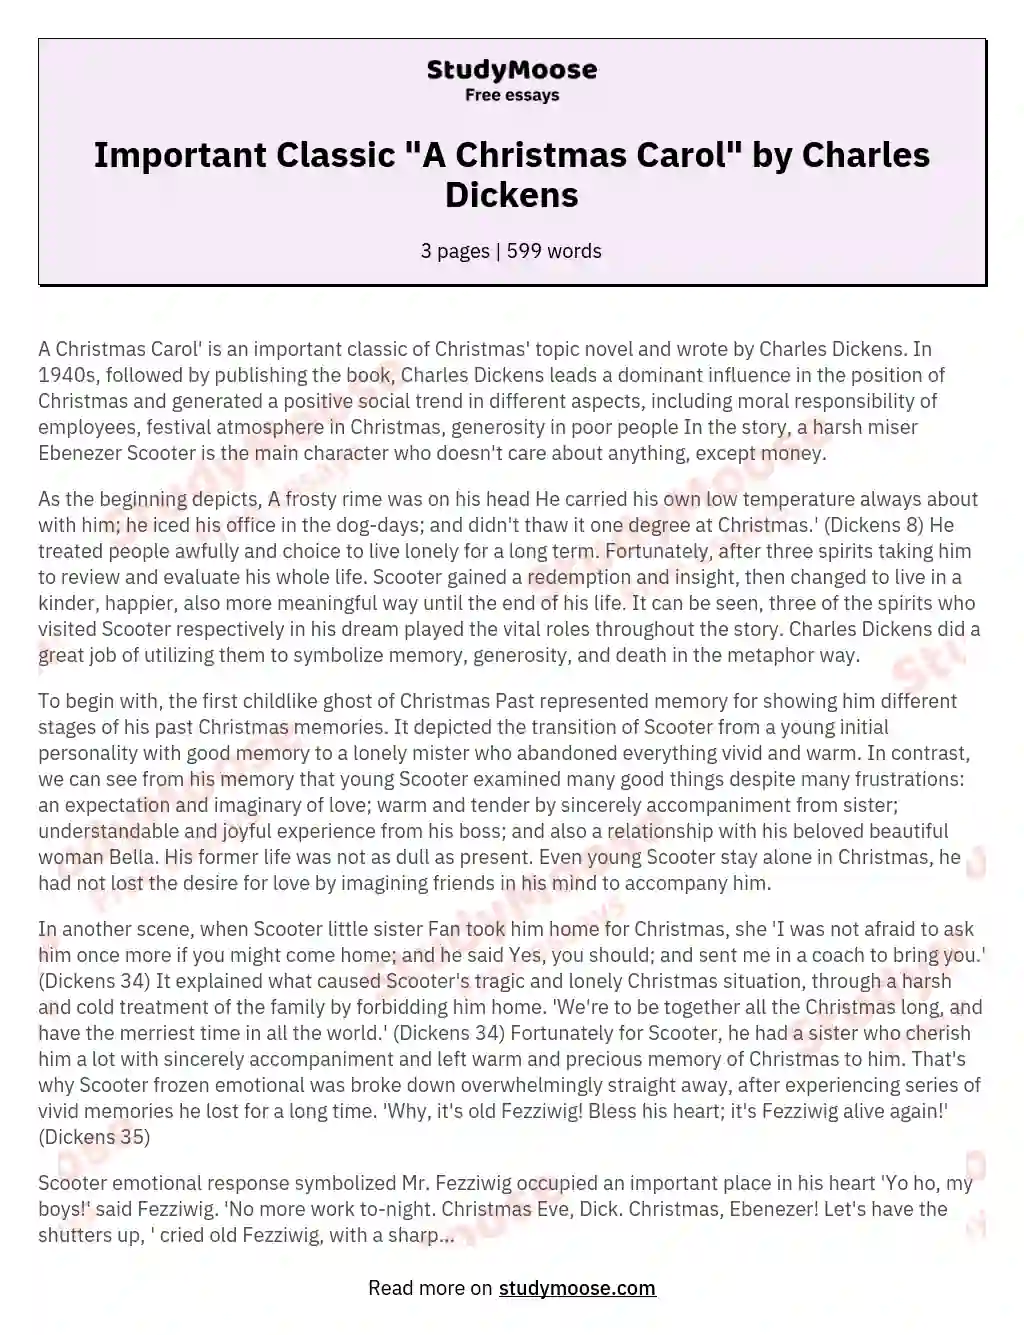 Important Classic "A Christmas Carol" by Charles Dickens essay